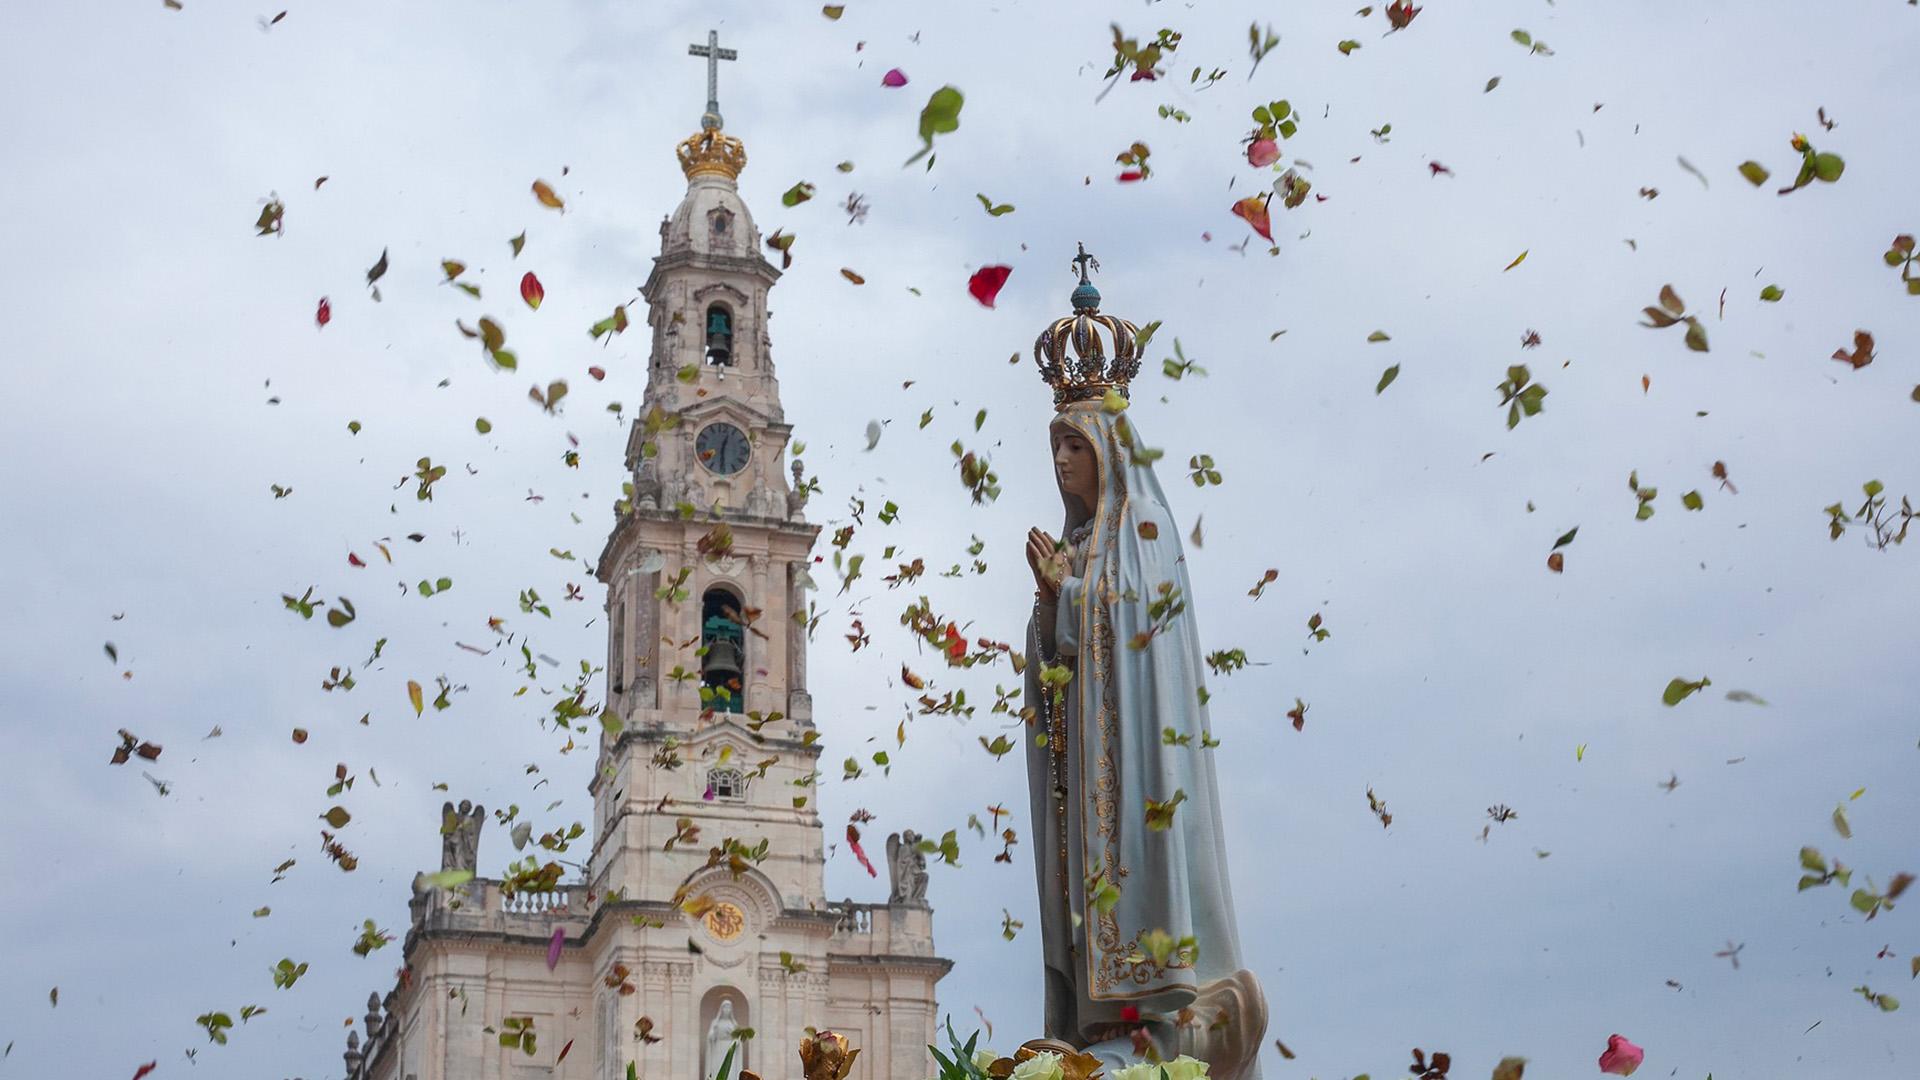 Sculptures of Our Lady of Fatima